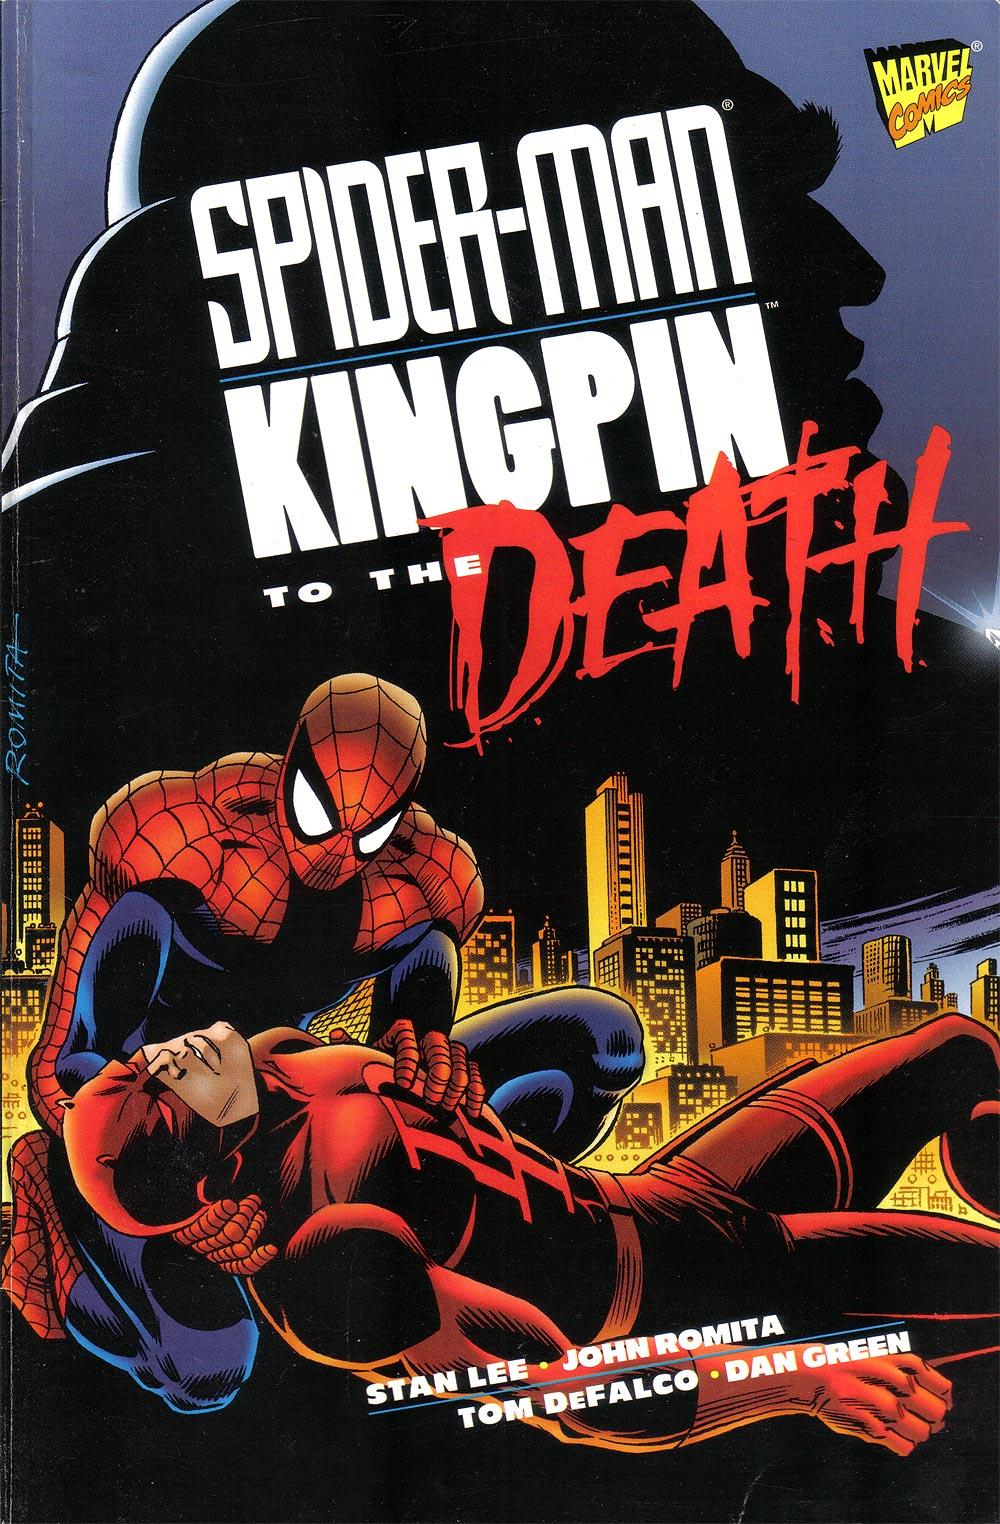 Spider-Man/Kingpin: To the Death Vol. 1 #1